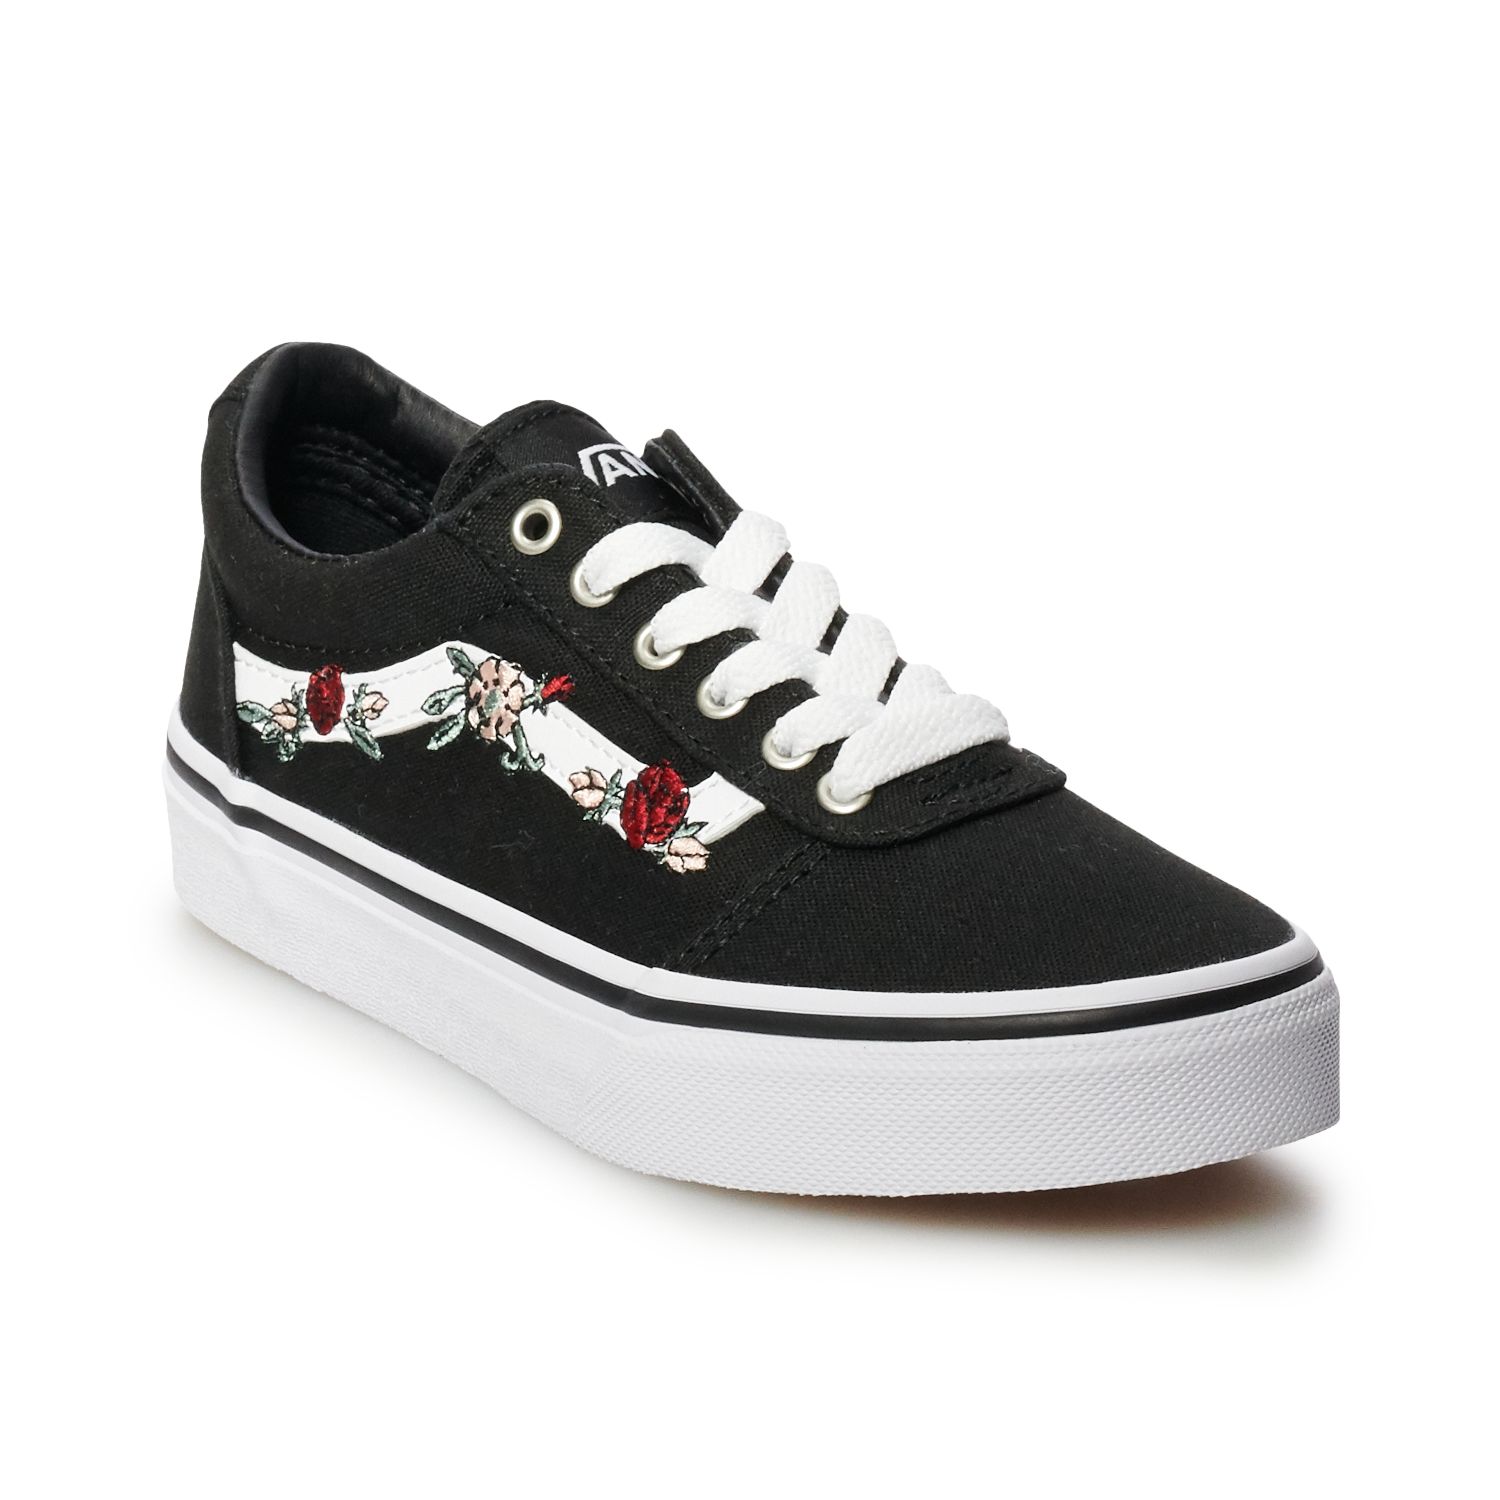 skate style shoes